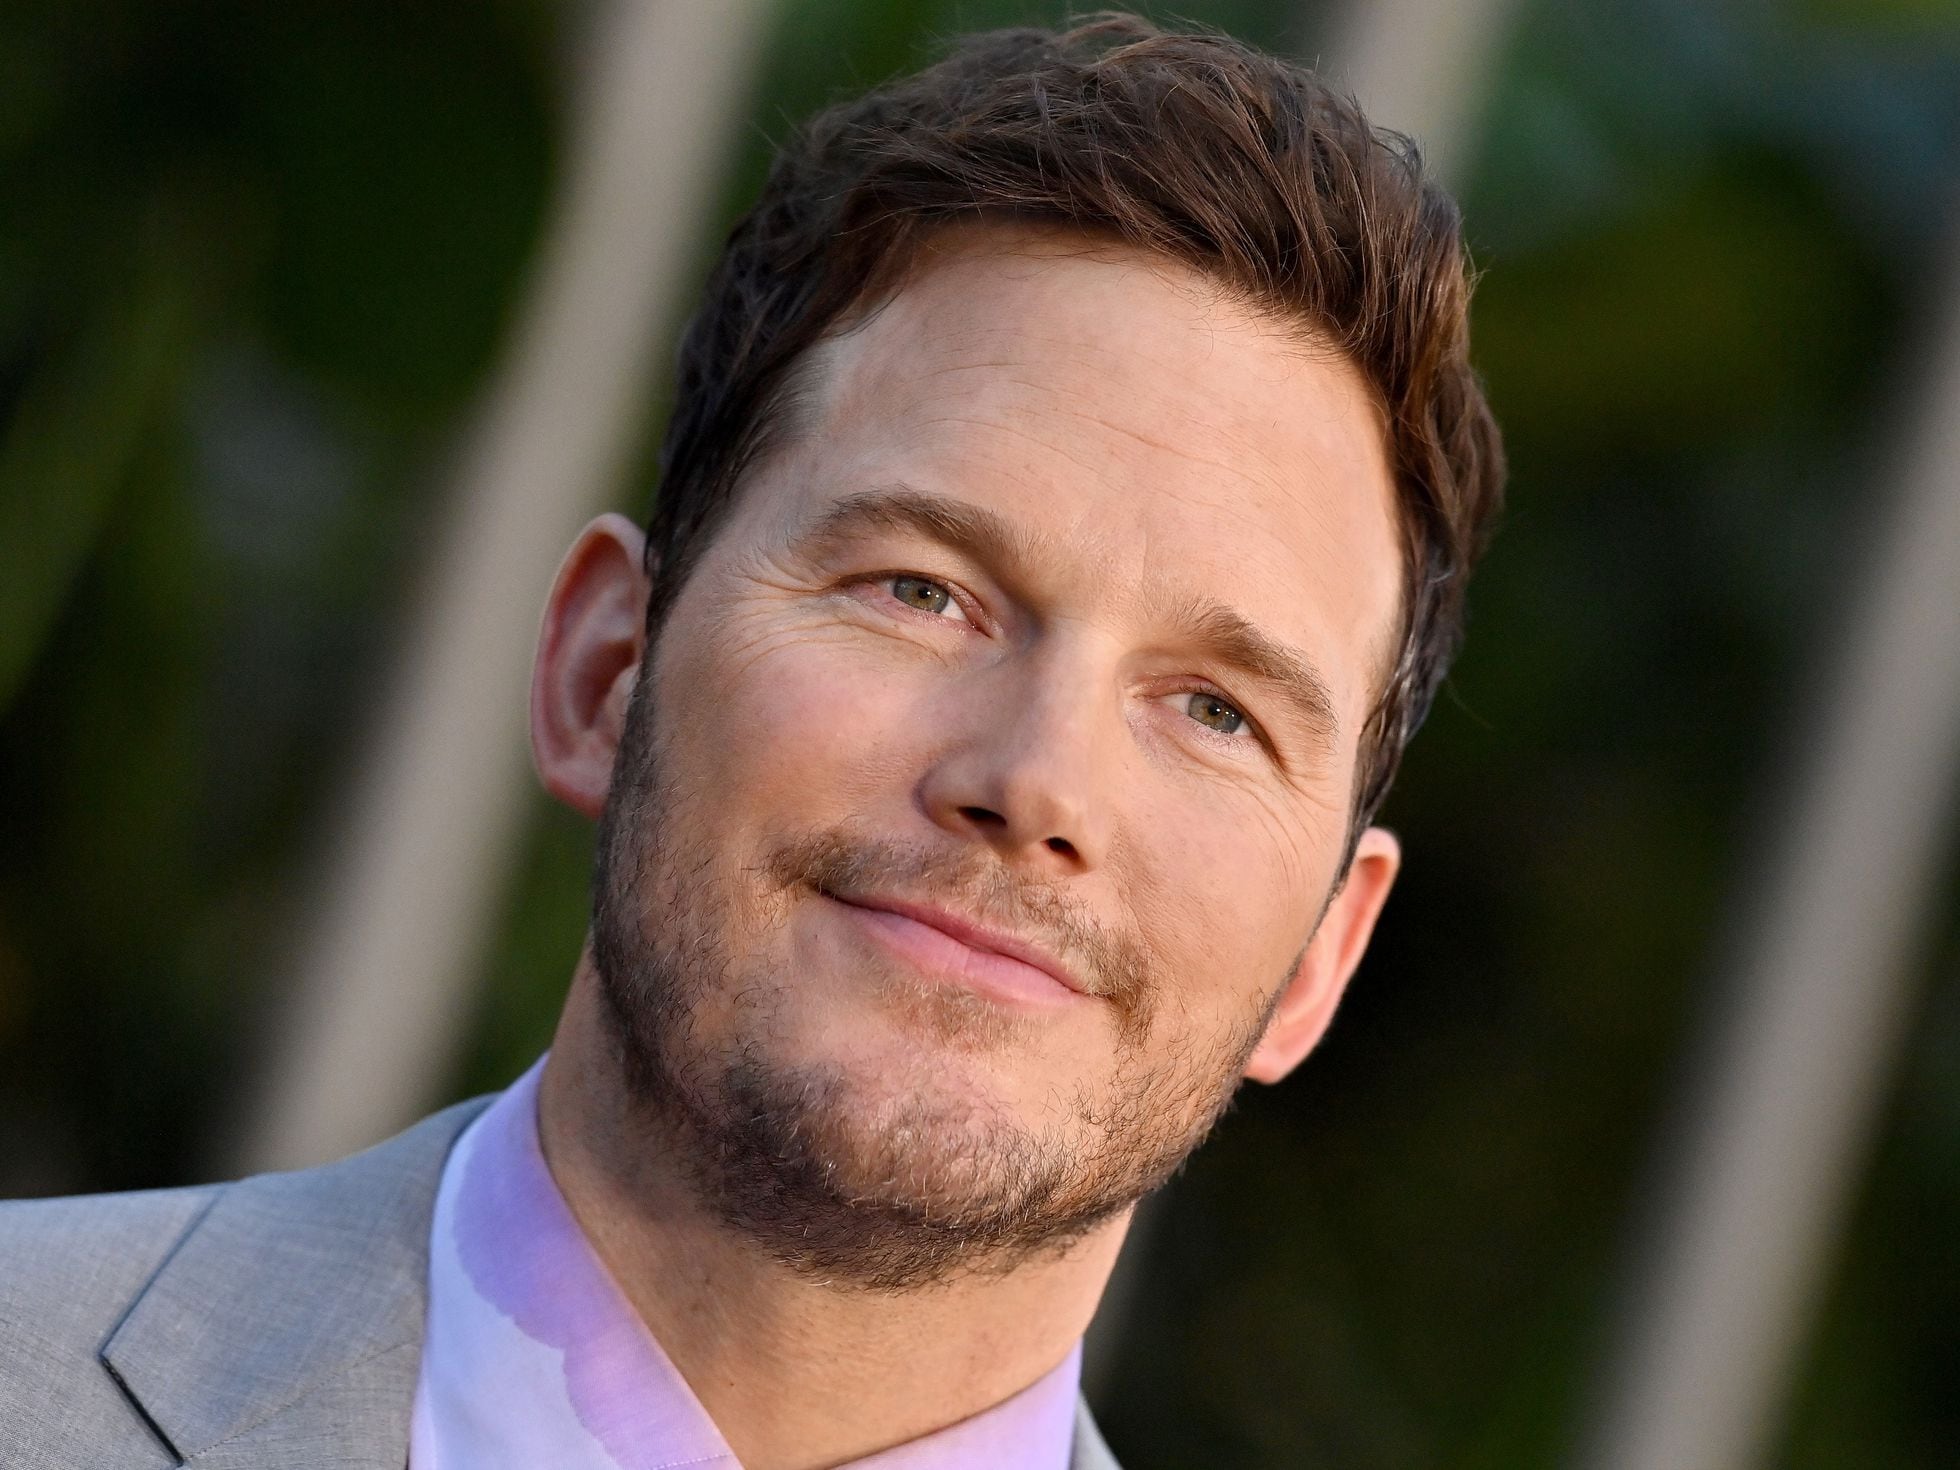 Male Celebrities Who Did Porn - One has to go': How Chris Pratt became the least liked of all of  Hollywood's actors named Chris | Culture | EL PAÃS English